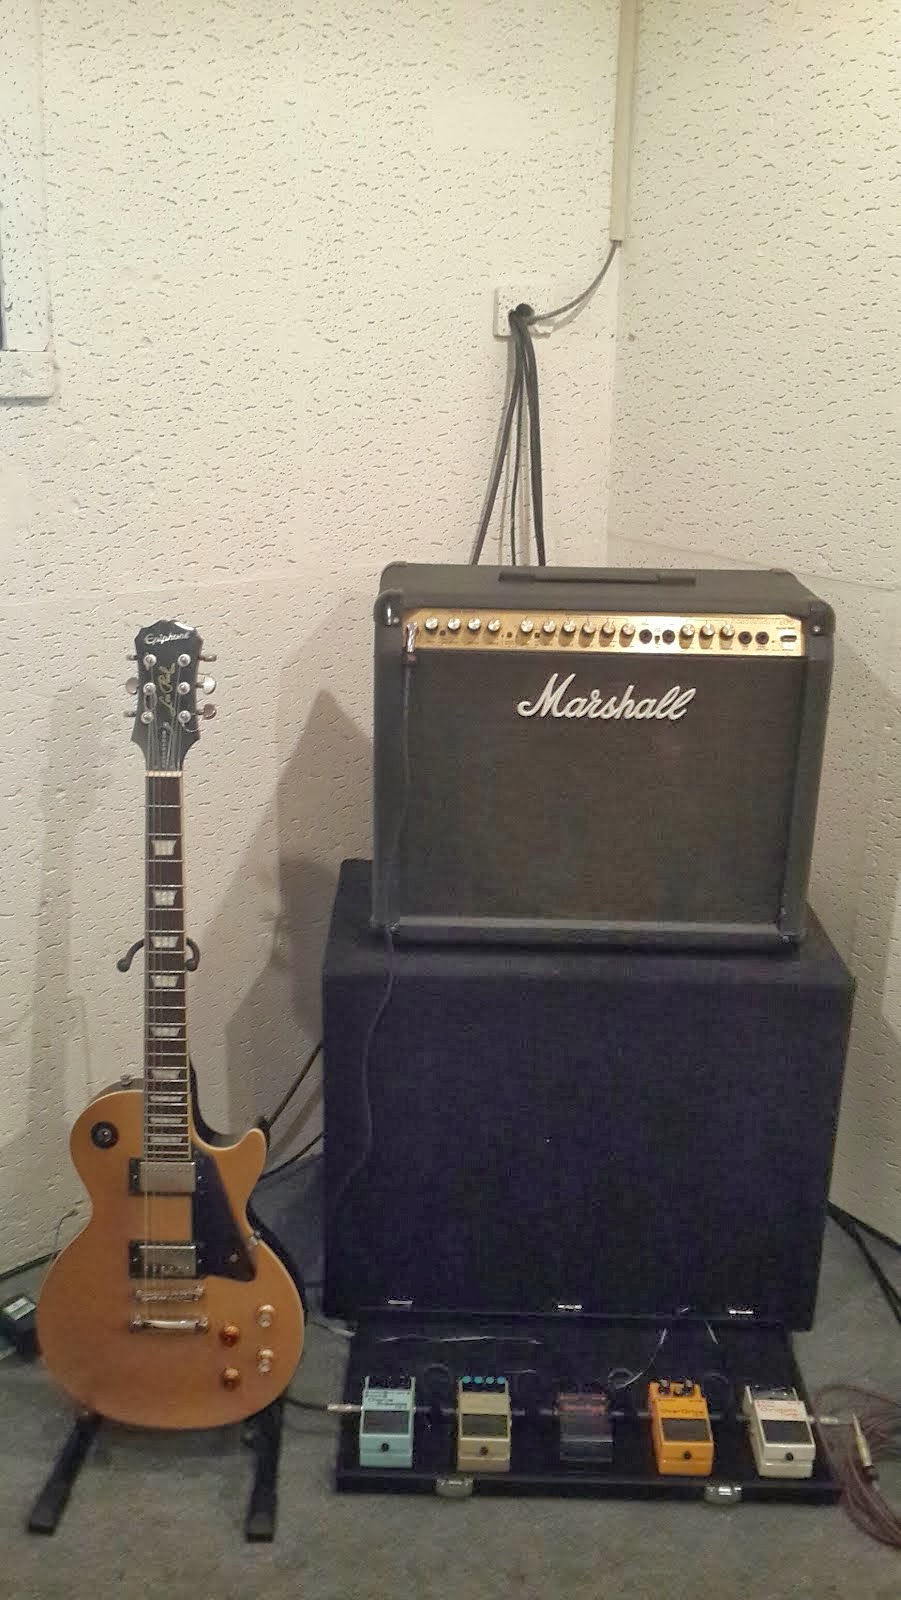 Guitar and Amplifier